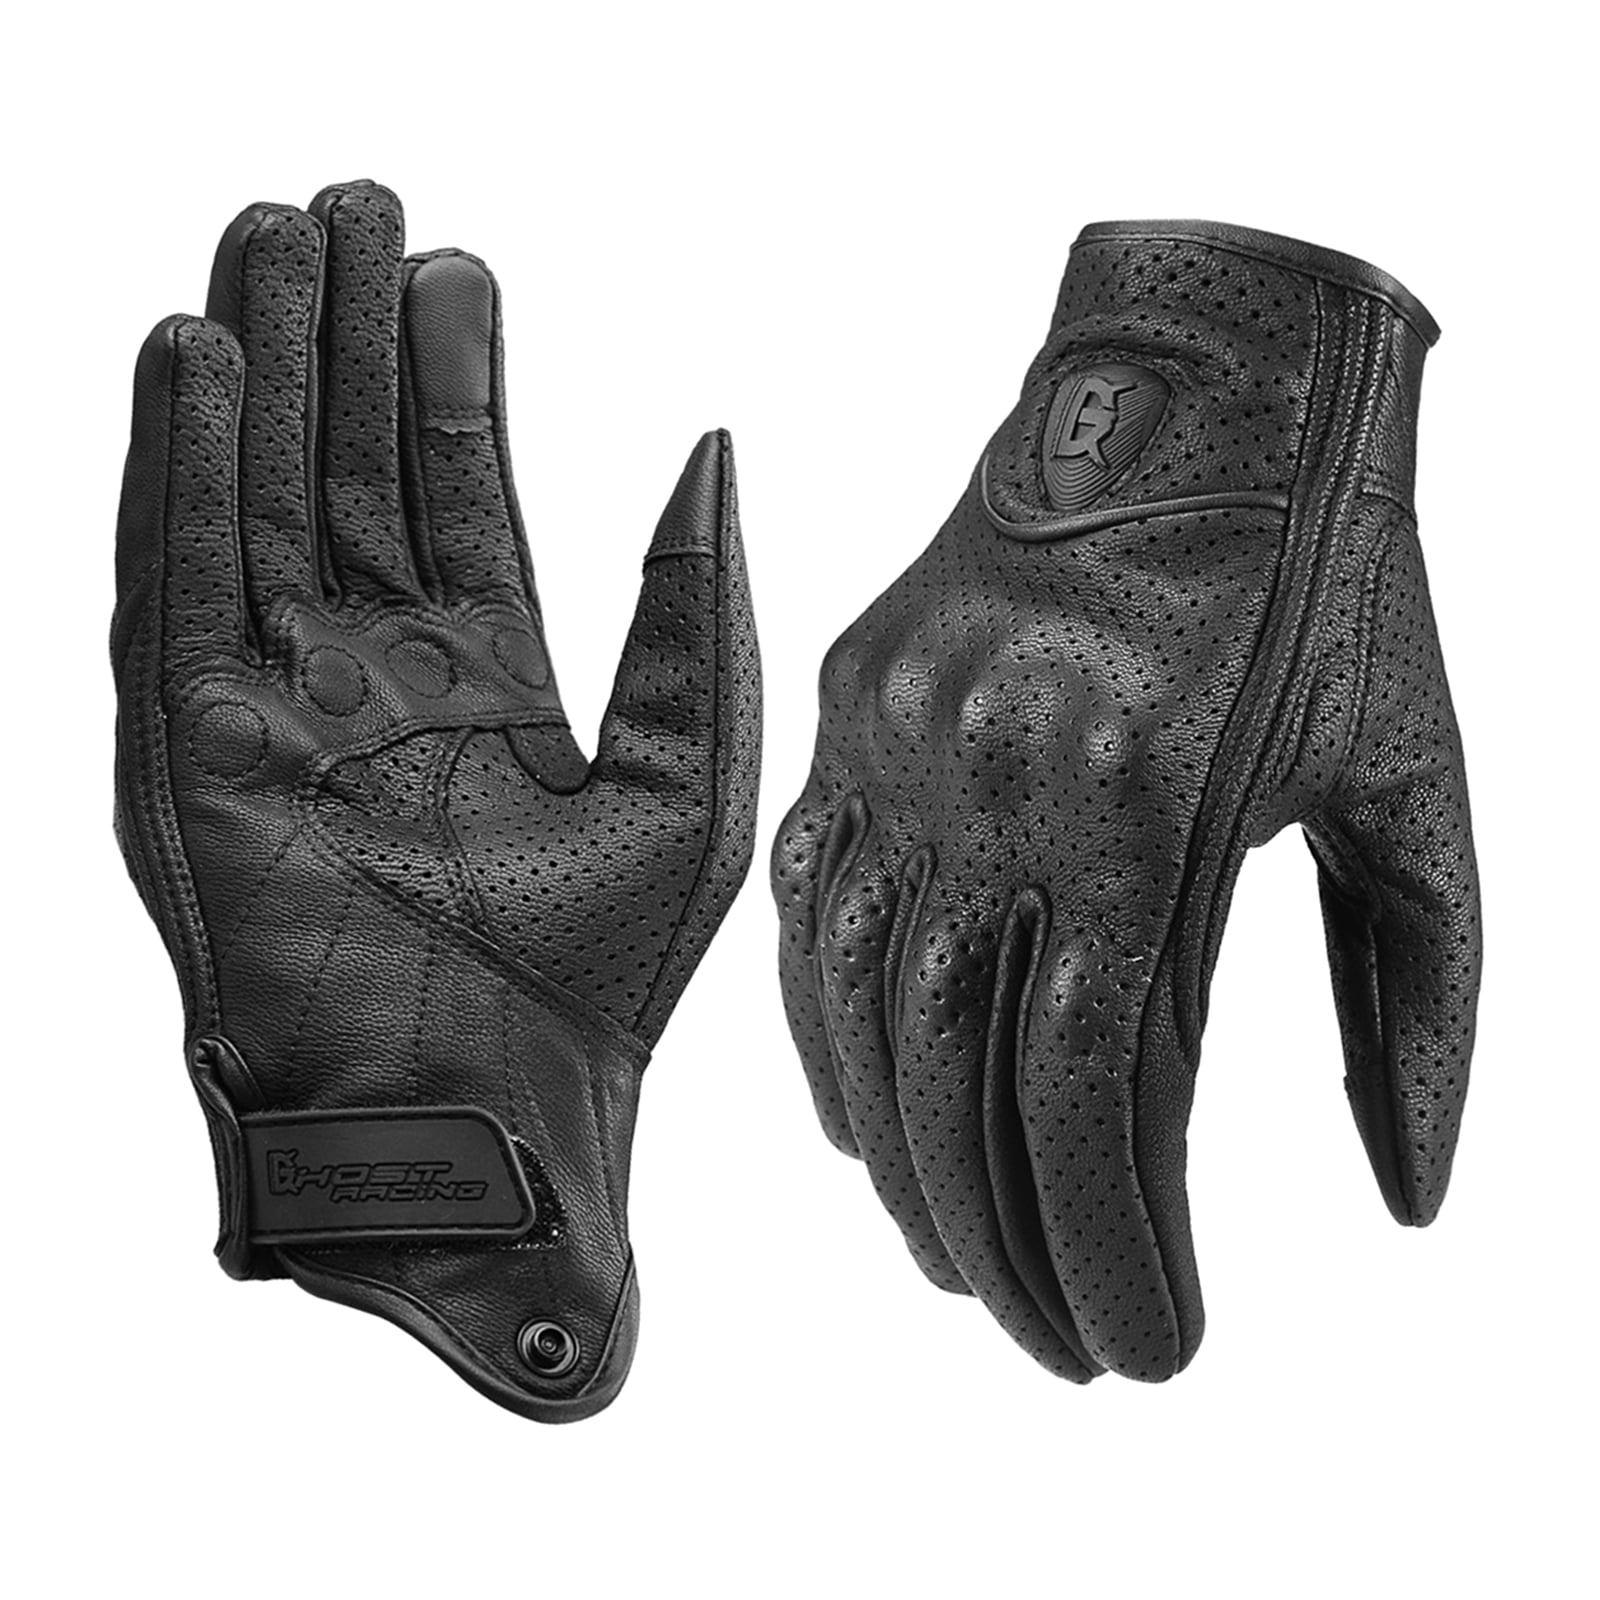 NNAB Leather Motorcycle Gloves ，Breathable Motorcycle Gloves for Men Women Which is a Touchscreen Anti-Slip Motorcycle Gloves & Racing Motorbike Gloves with Wall Hook